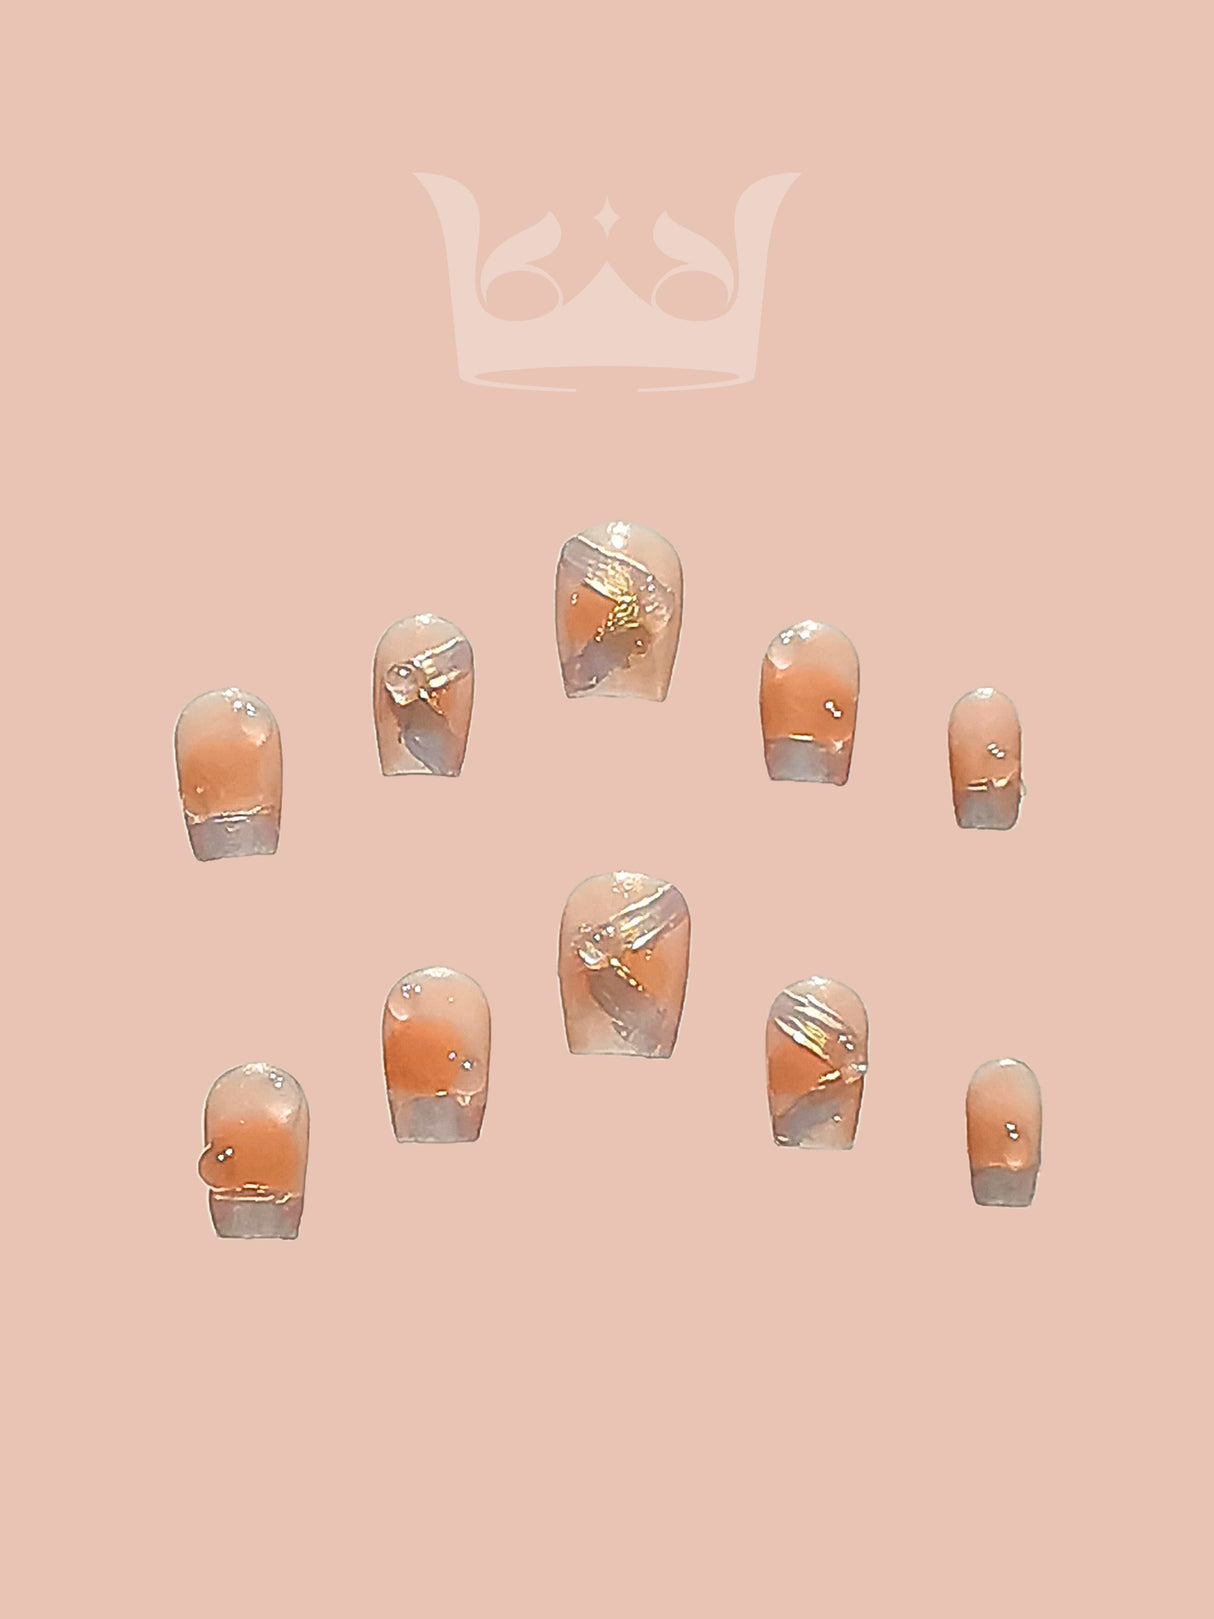 These press-on nails are ideal for a natural look with a touch of sparkle. They have a translucent appearance, iridescent flecks, varying sizes, and a delicate aesthetic.